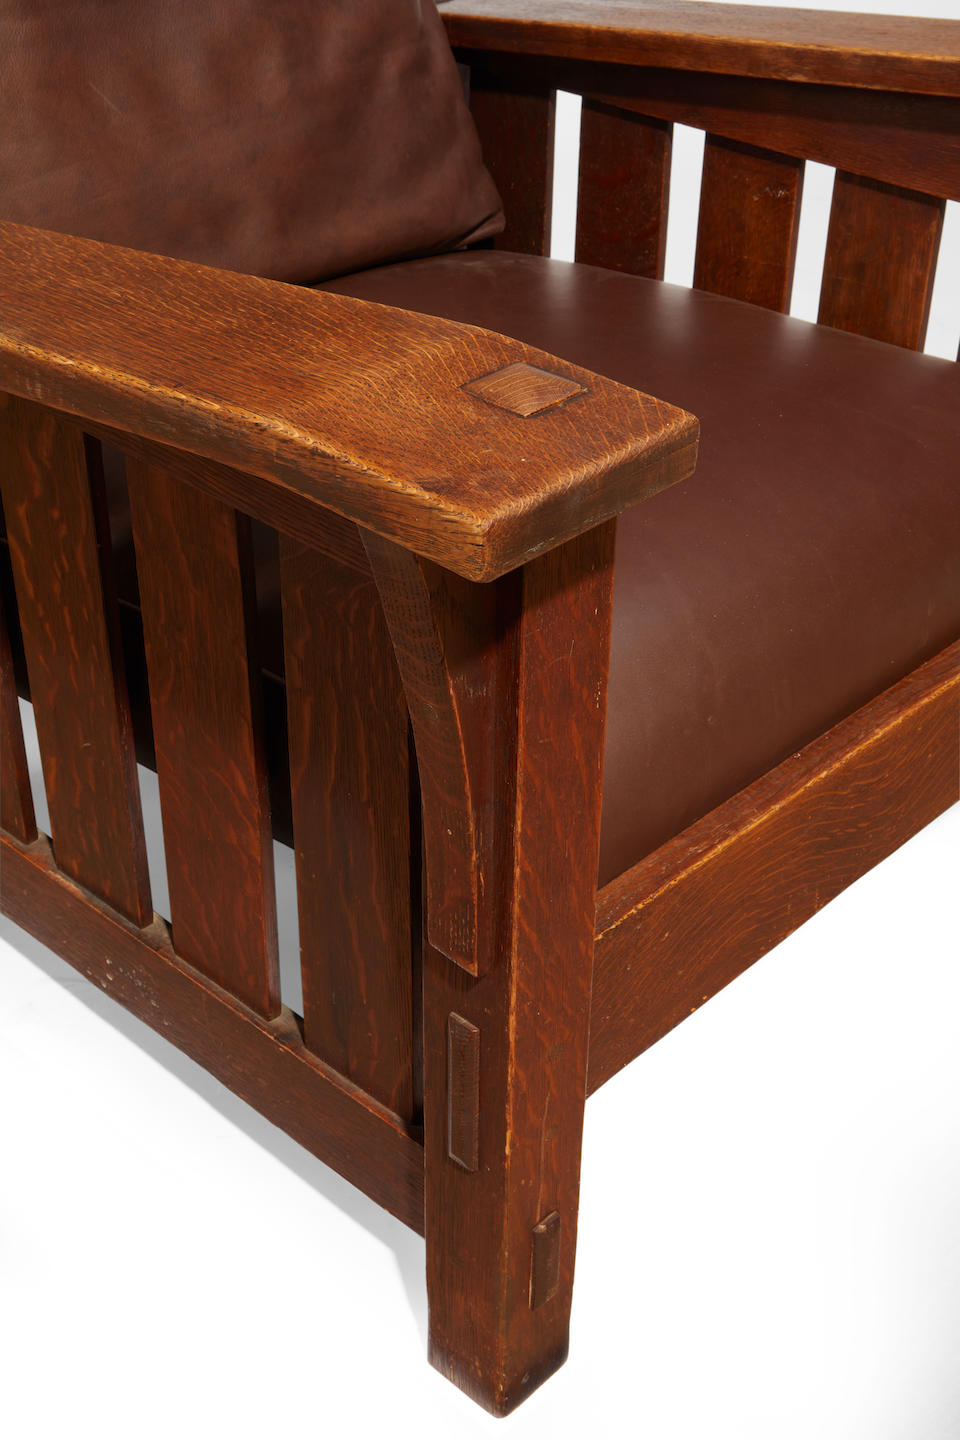 Gustav Stickley (1858-1942) Drop-Arm Morris Chaircirca 1905model no. 369, for the Craftsman Workshops of Gustav Stickley, Eastwood, New York, oak, later leather upholstered cushionsheight 40 (101cm); width 39 1/2in (95cm); depth 32 1/4in (82cm)